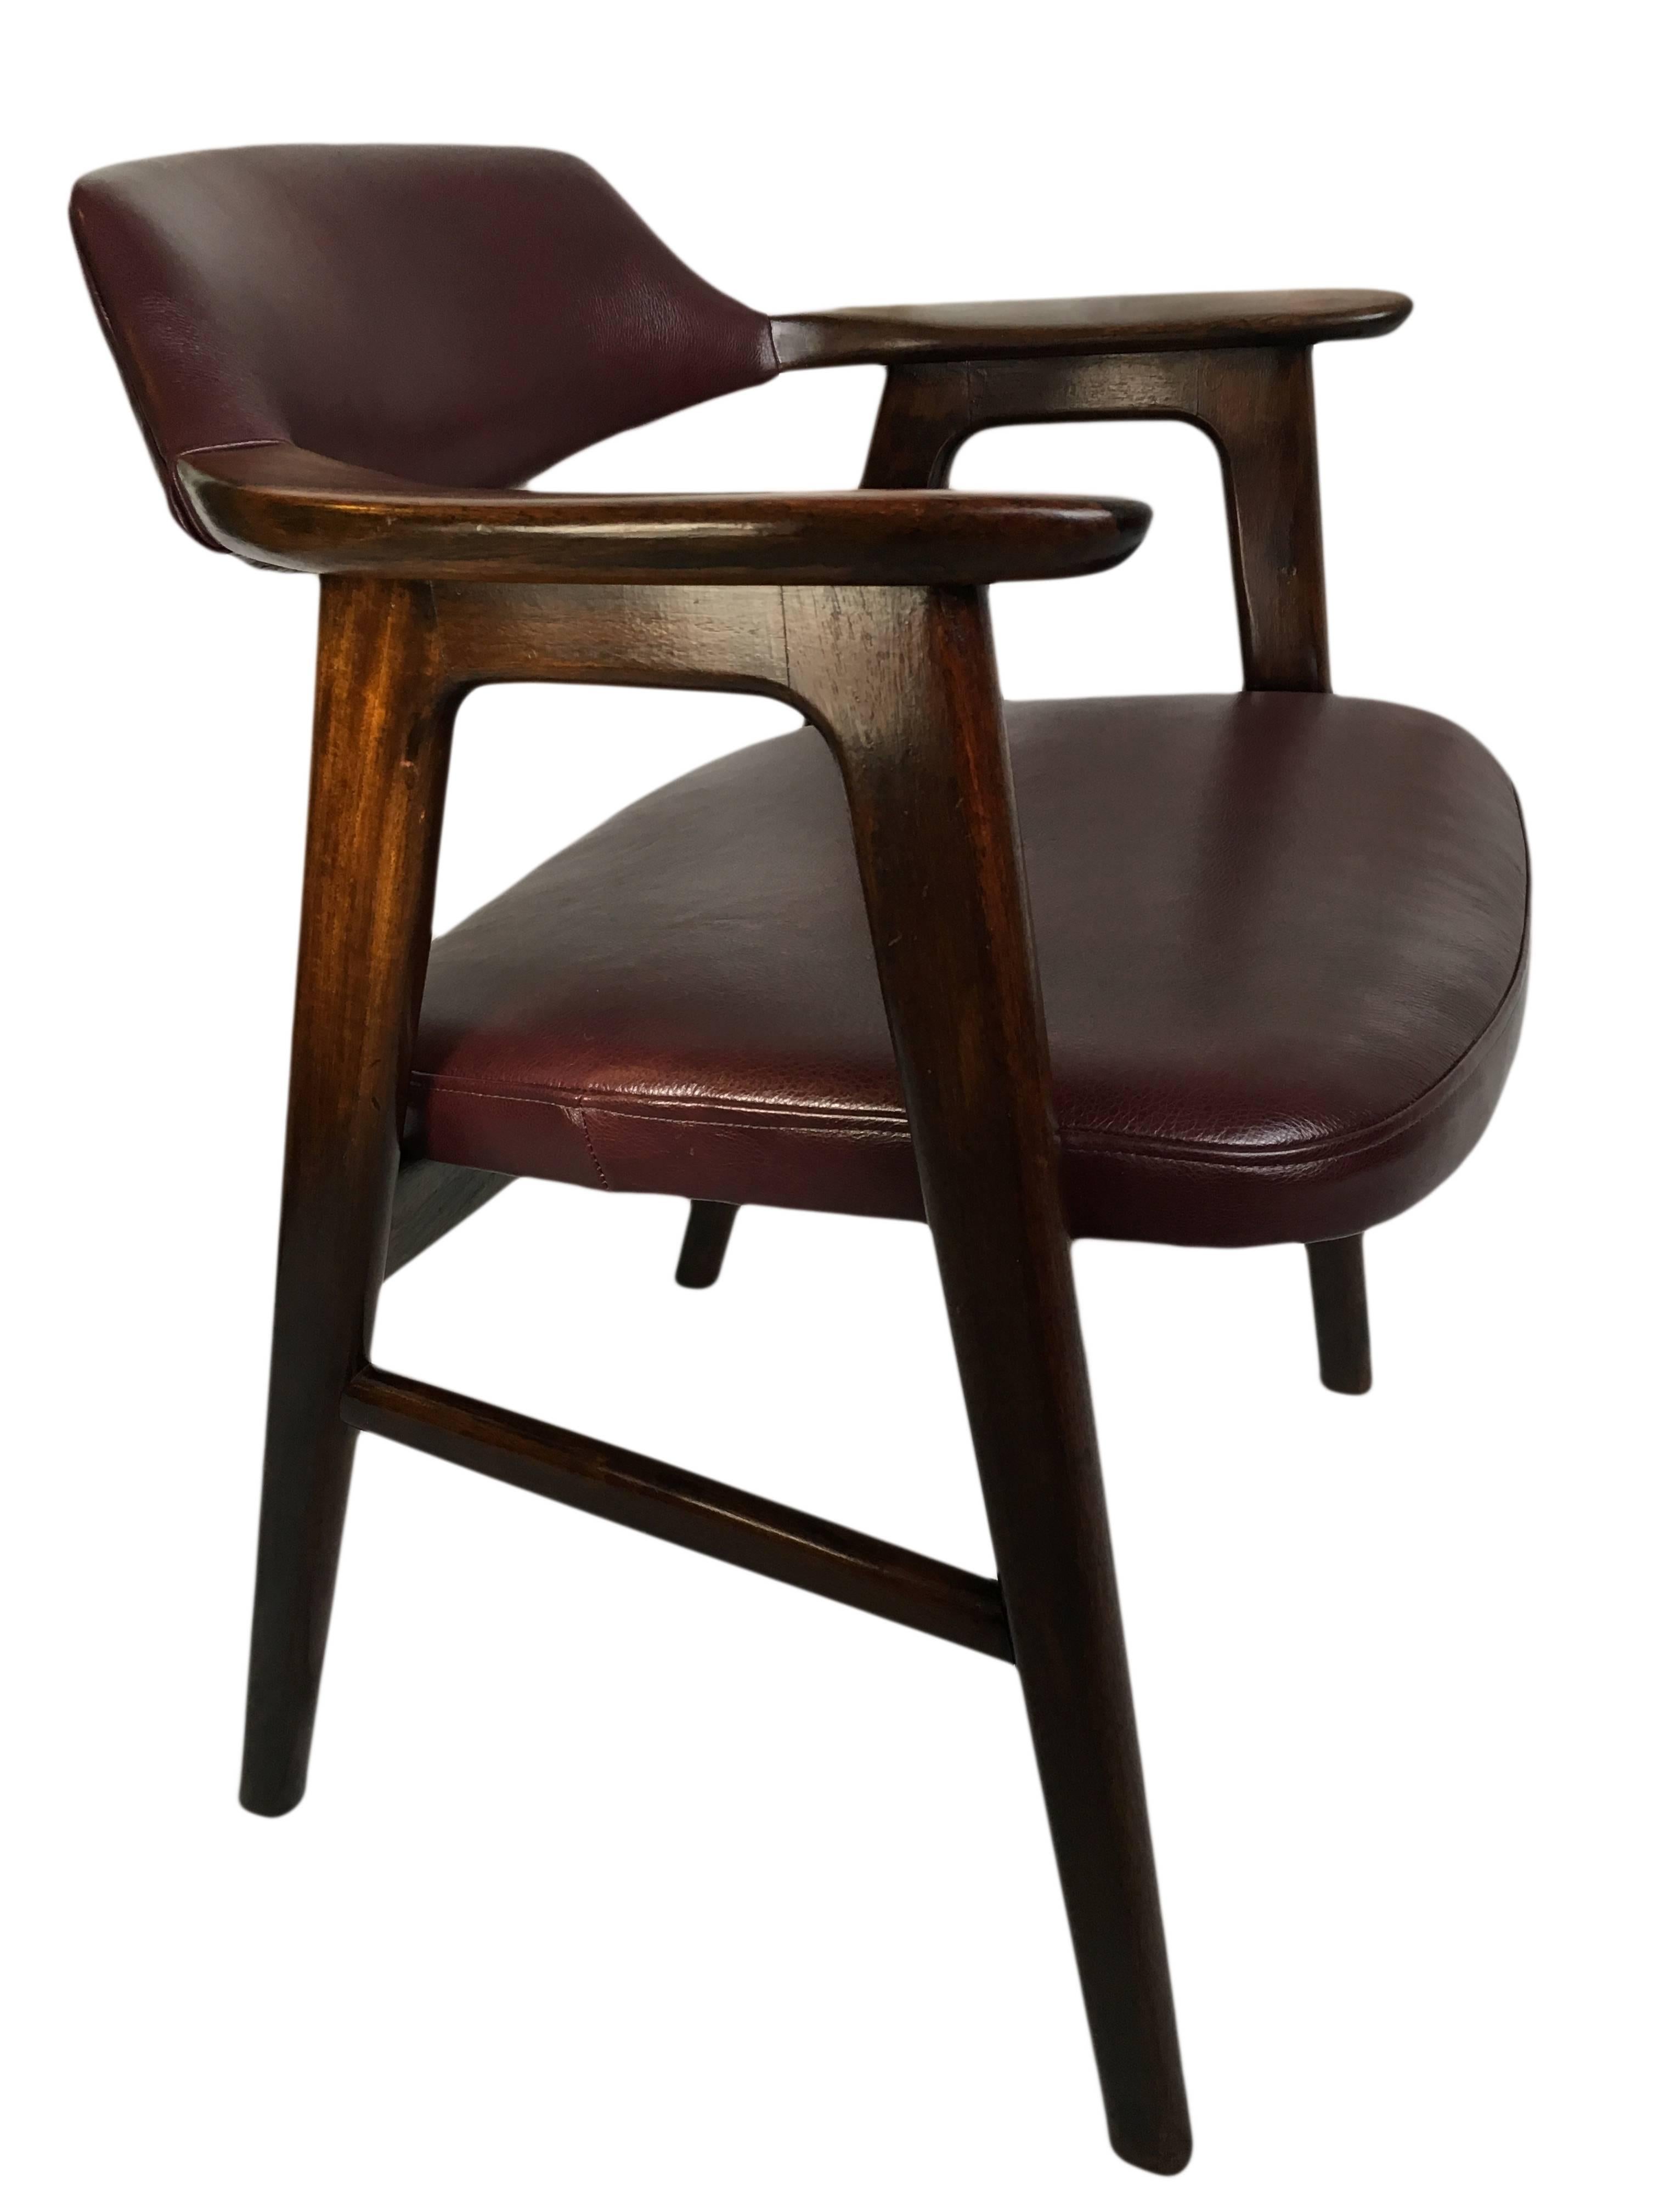 Superb quality rosewood armchair or desk chair by Erik Kirkegaard. New burgundy leather uupholstery.
Produced in Denmark, circa 1955.